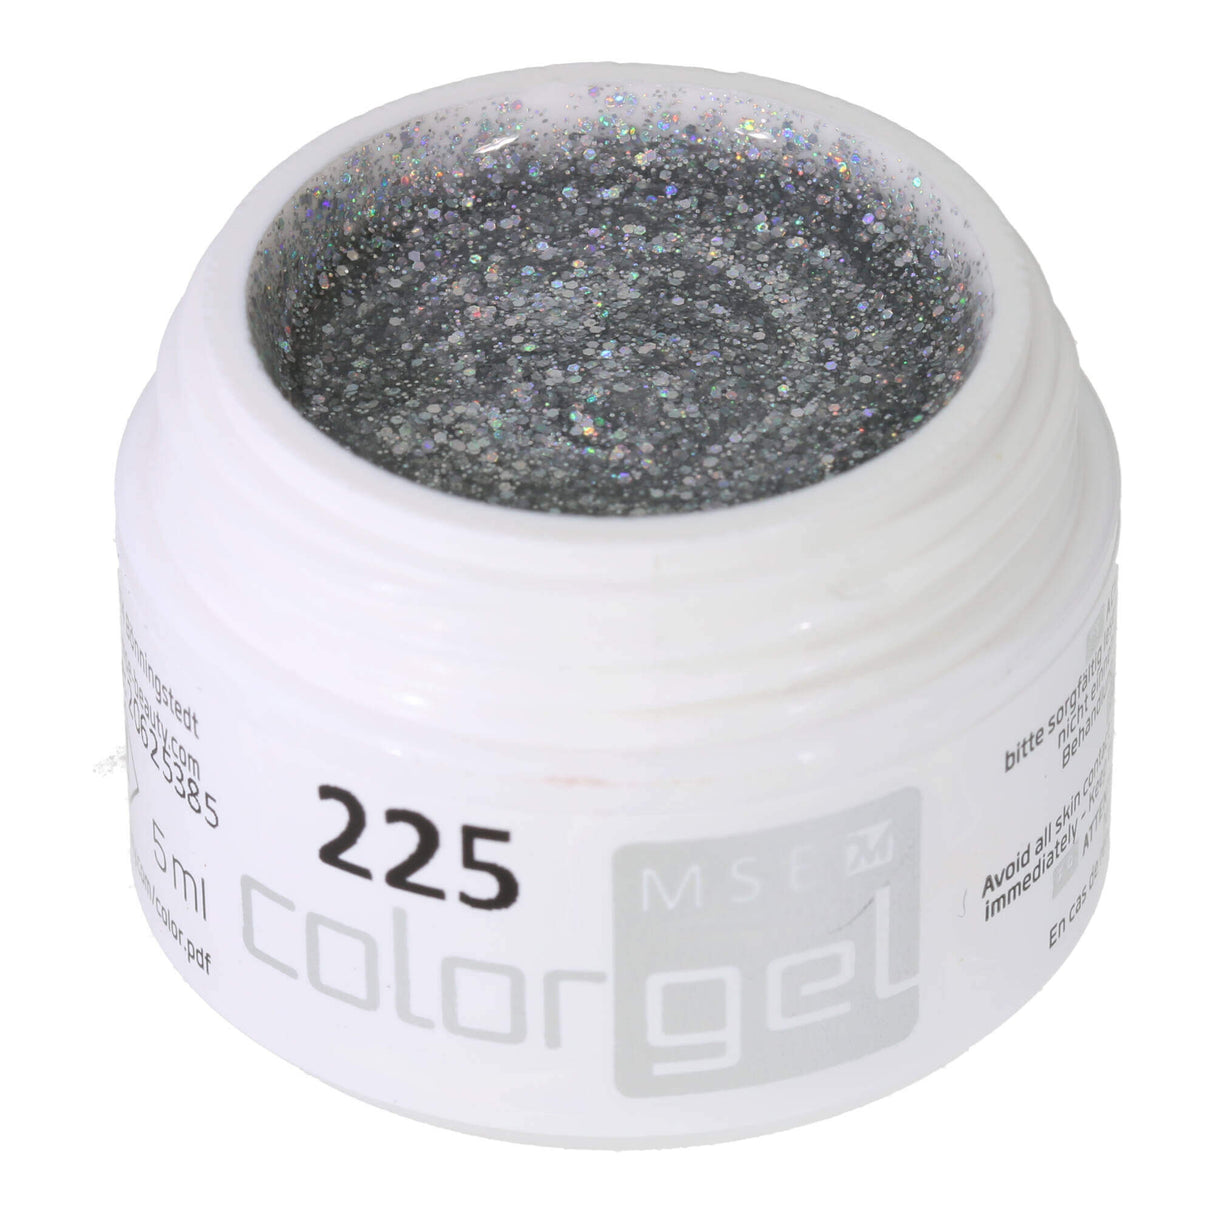 # 225 Premium-GLITTER Color Gel 5ml silver glitter with a very nice rainbow effect